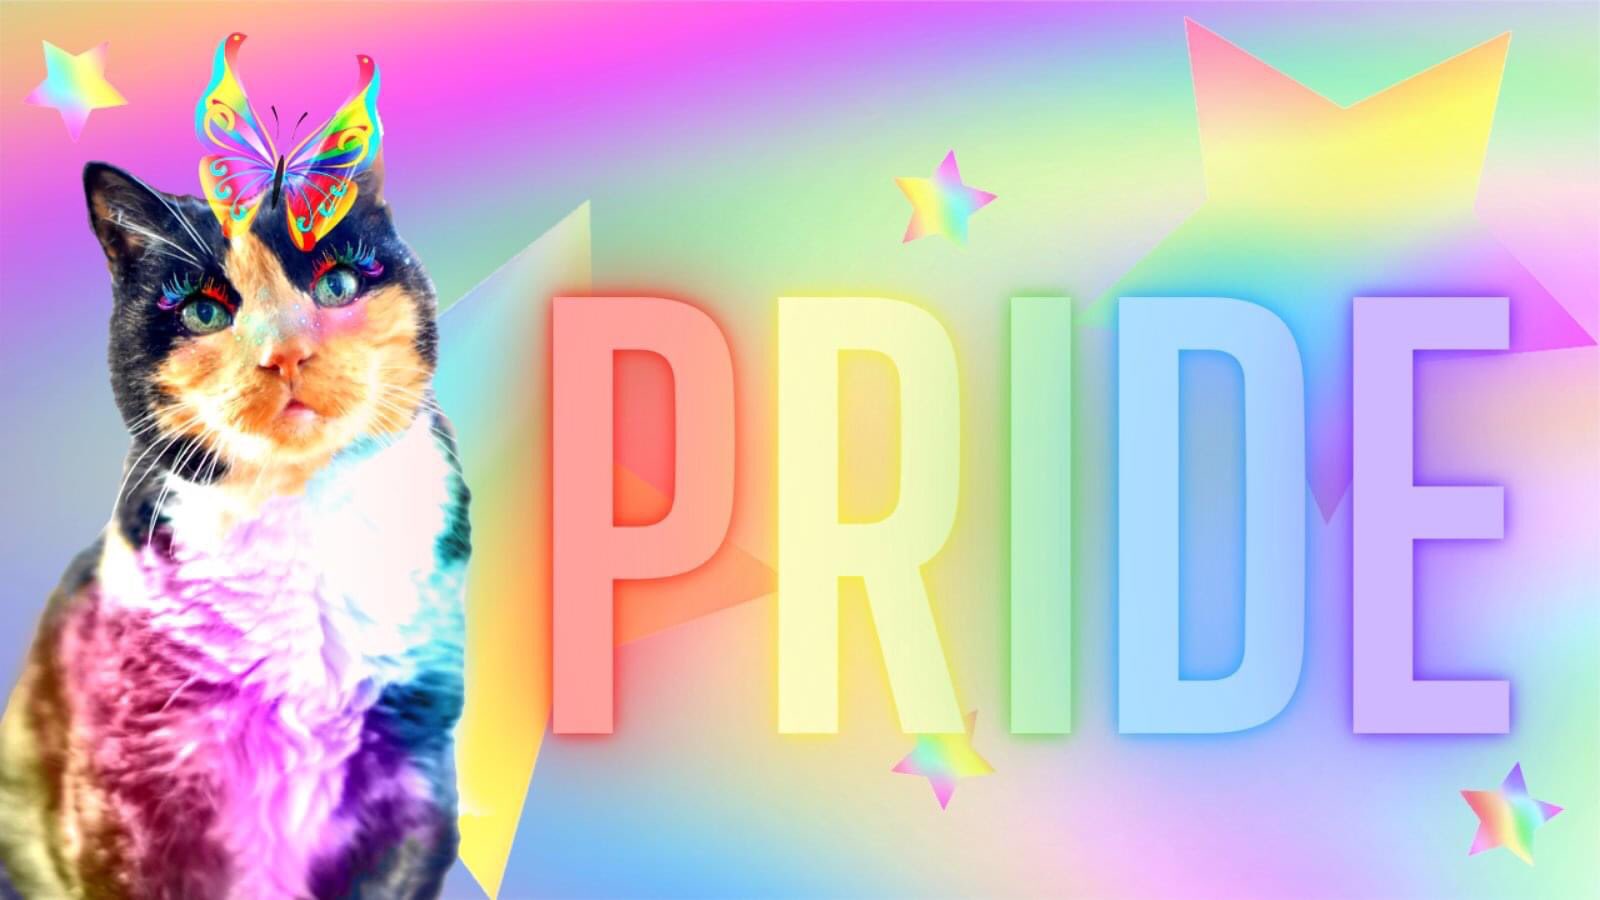 Cat Care Society #Pride Month! We are participating in Denver's Pride Festival all month long